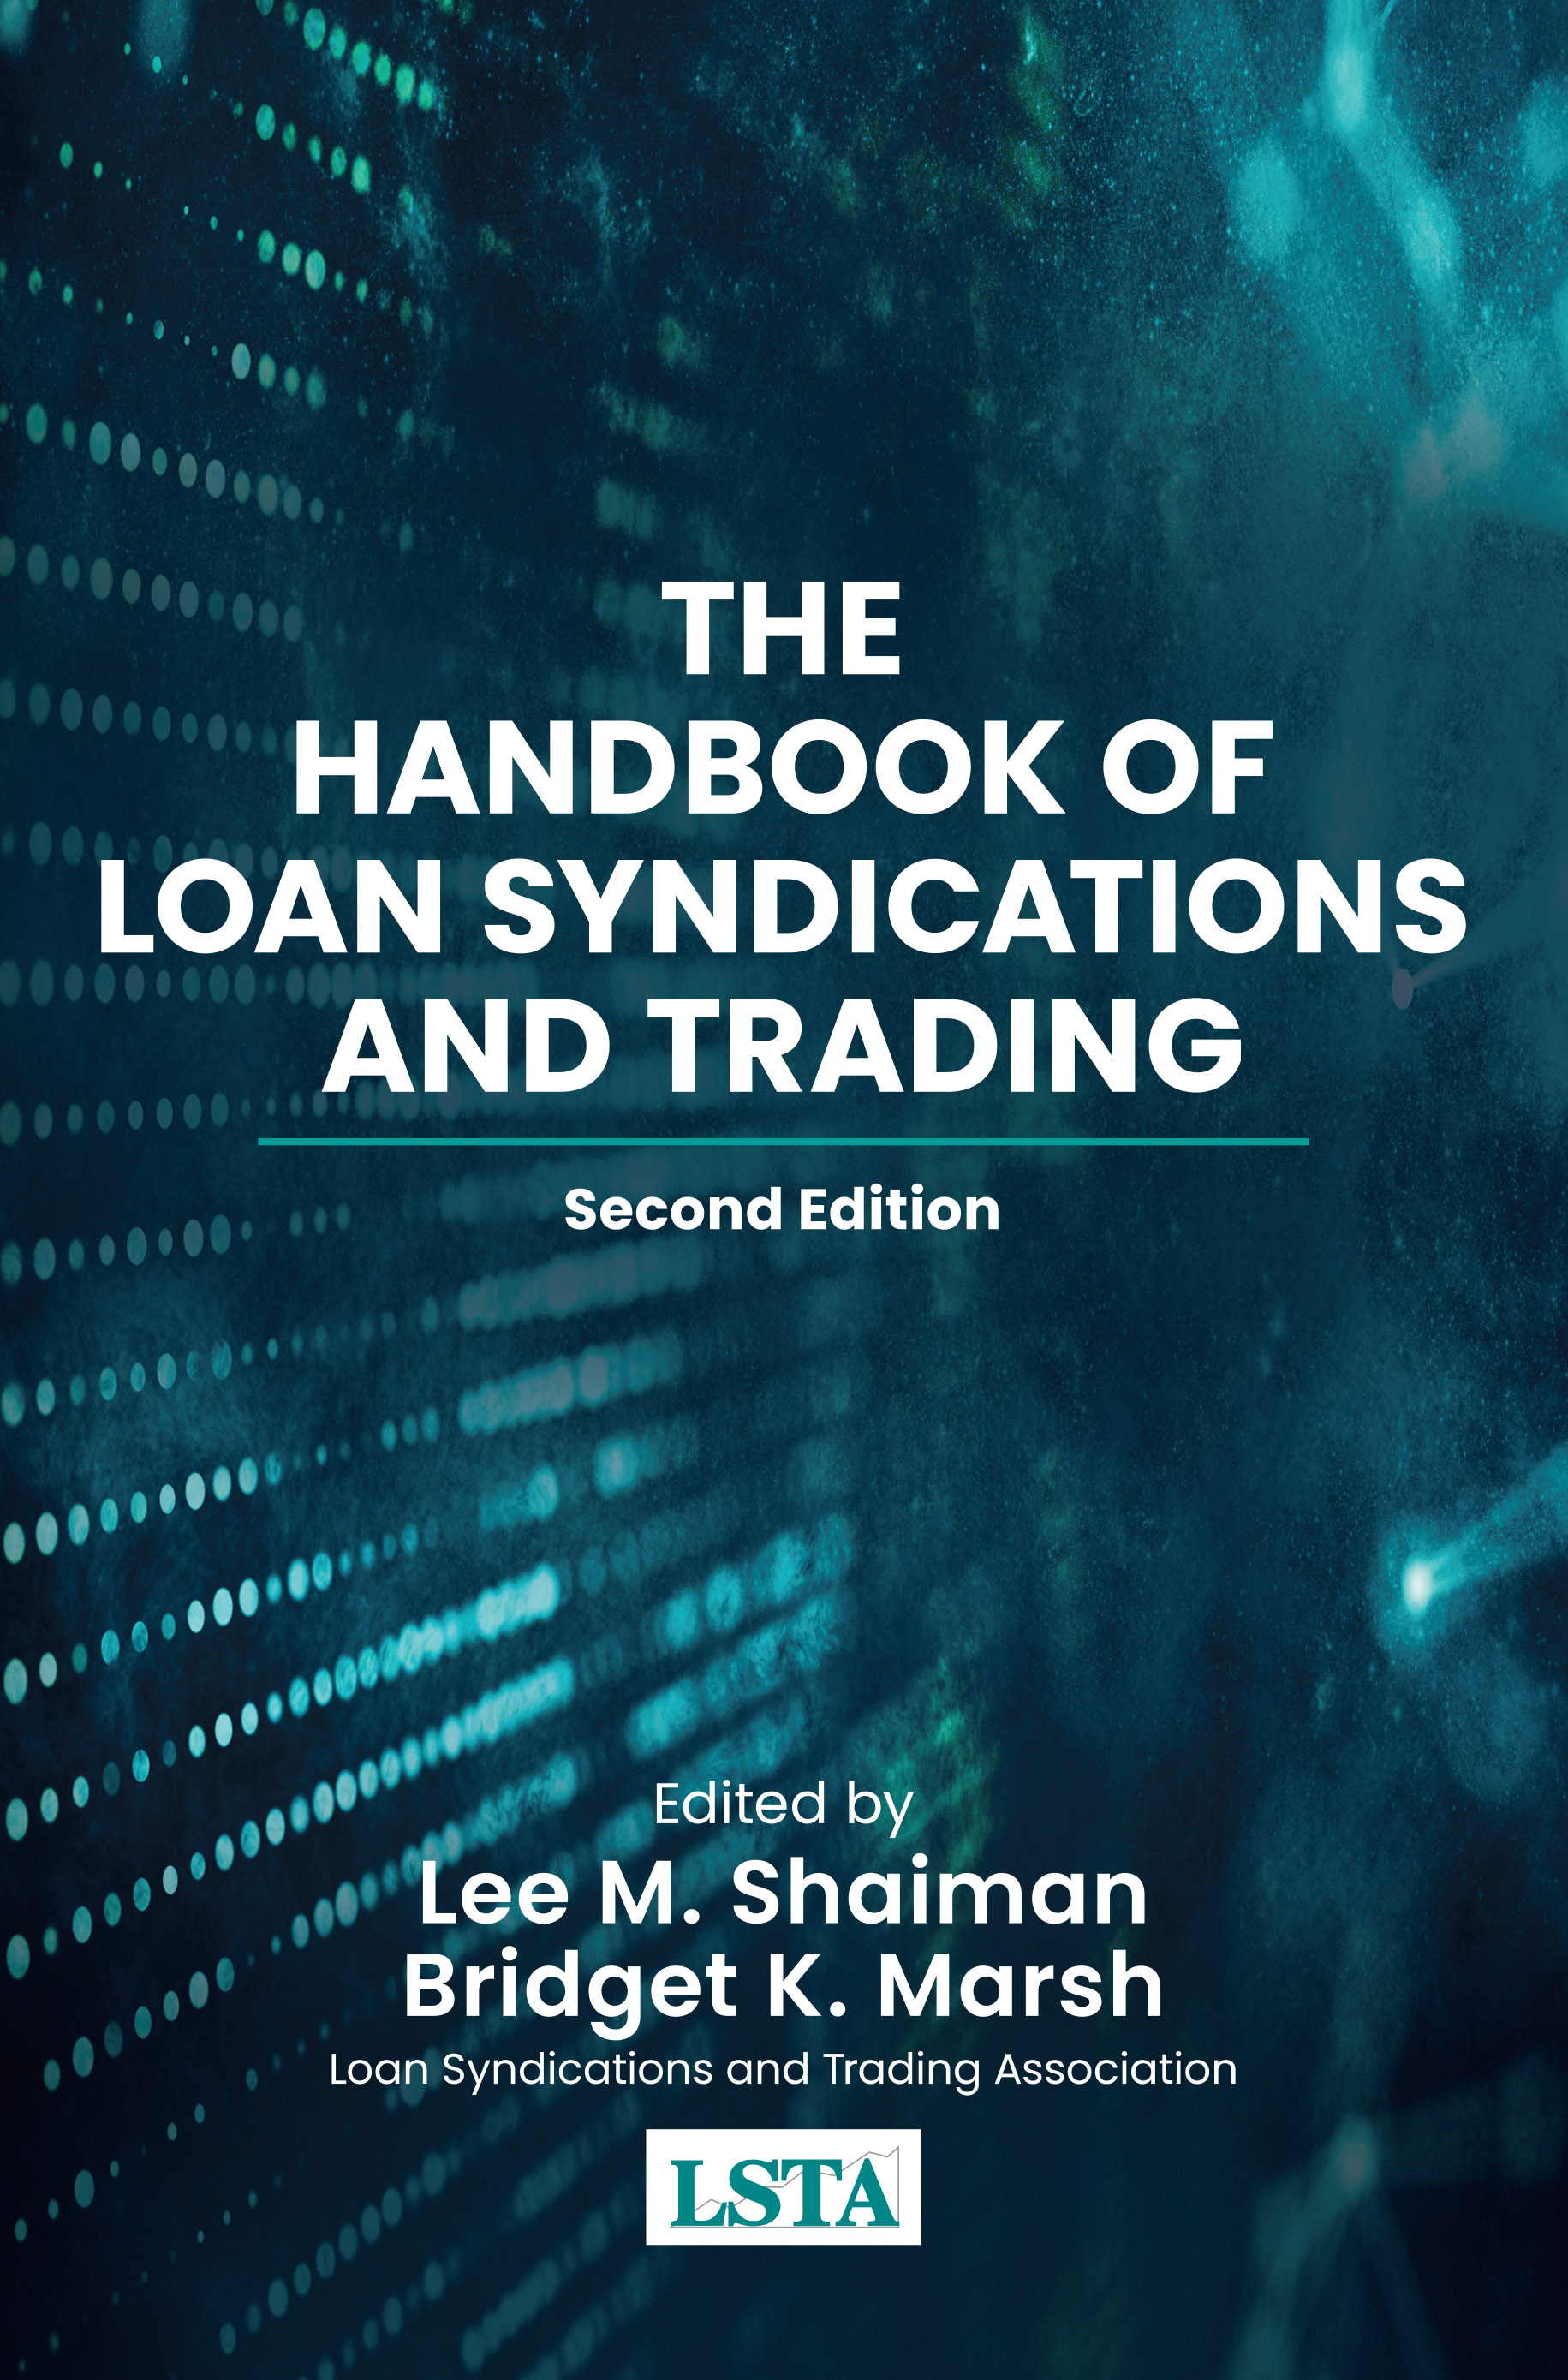 The Handbook of Loan Syndications and Trading, Second Edition